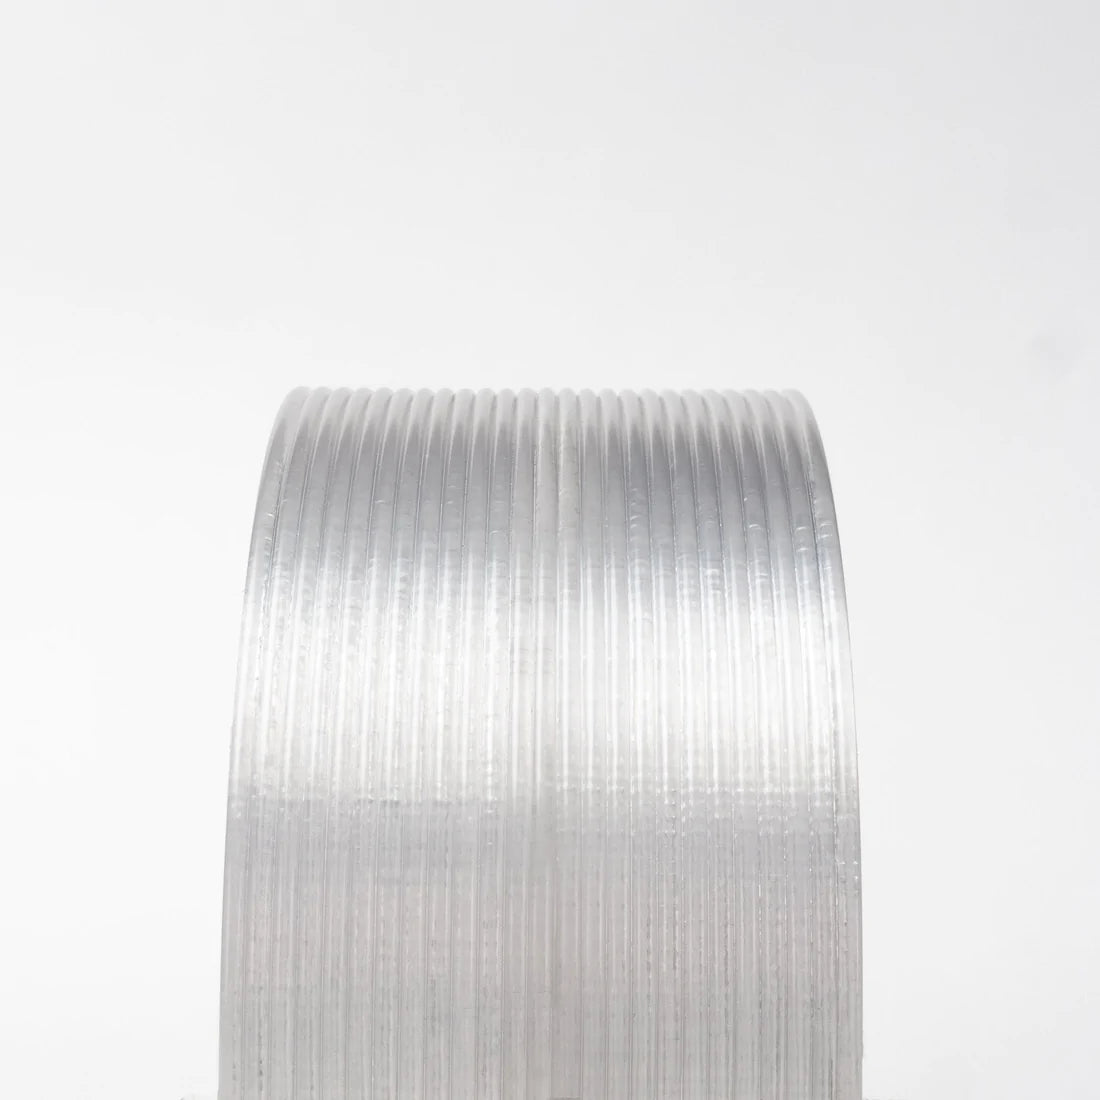 Protopasta Simply Clear PETG (75% recycled) - 1.75mm (1kg) - Clear